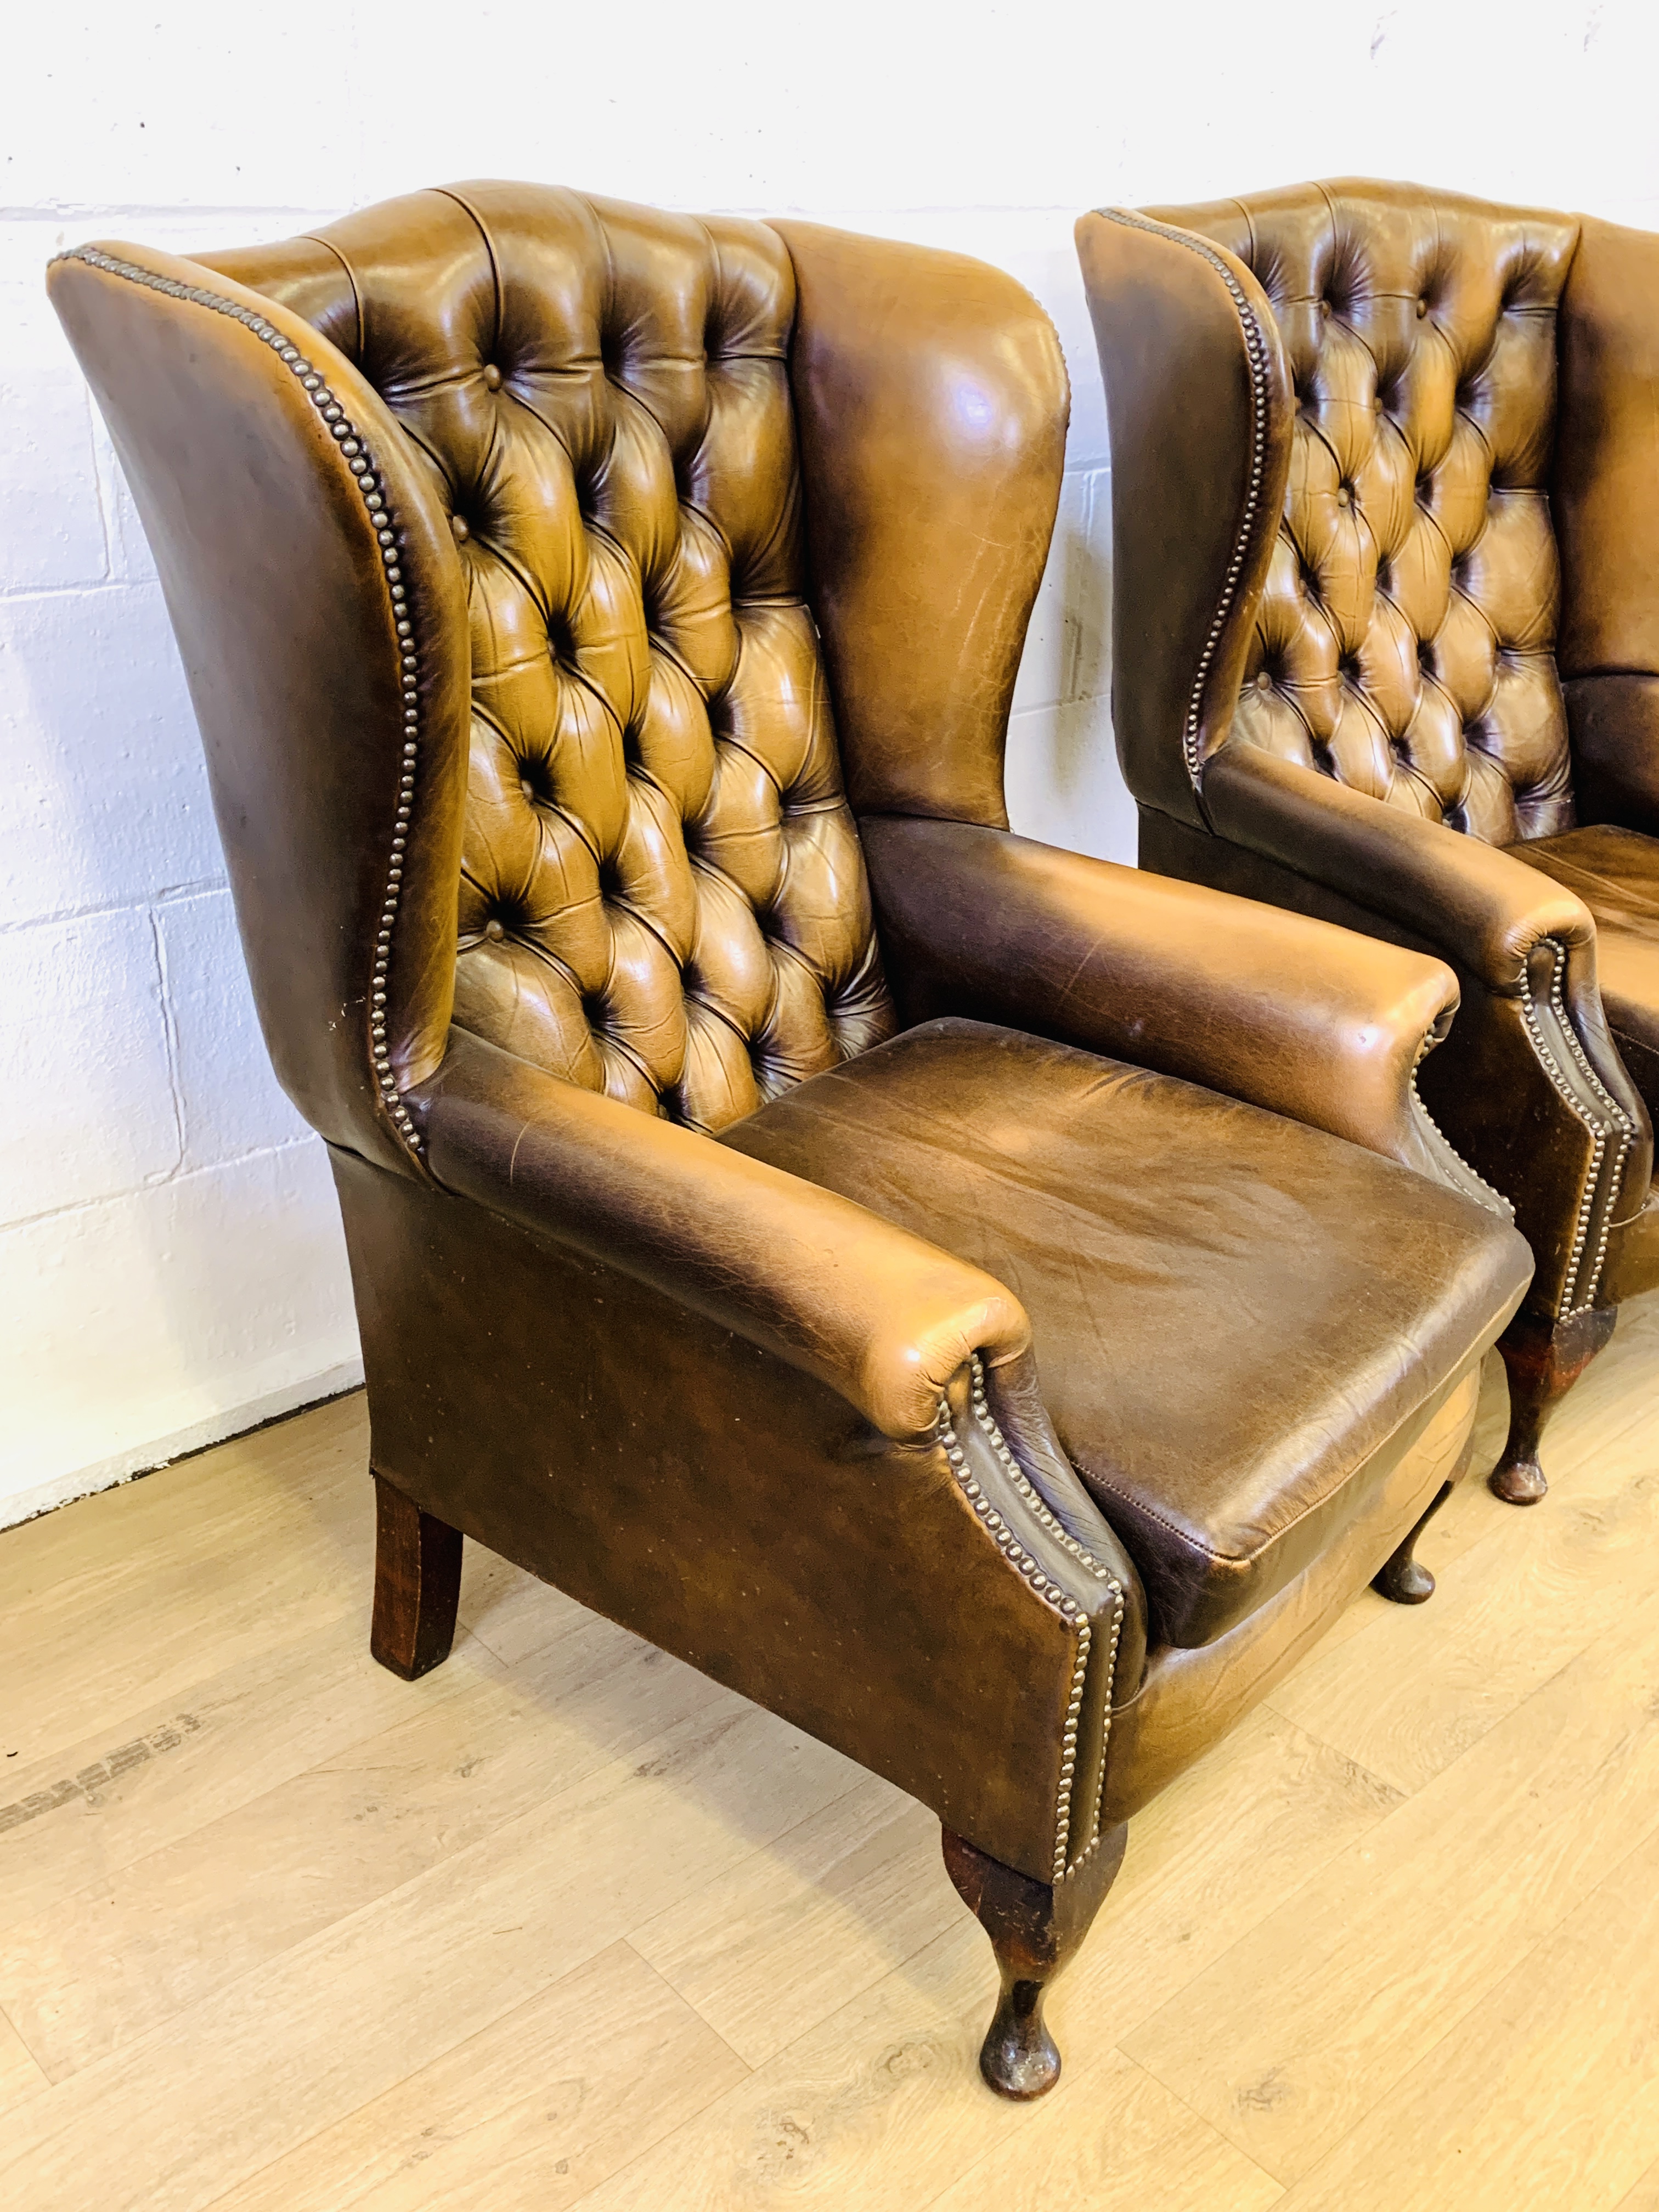 Two leather style armchairs - Image 3 of 5